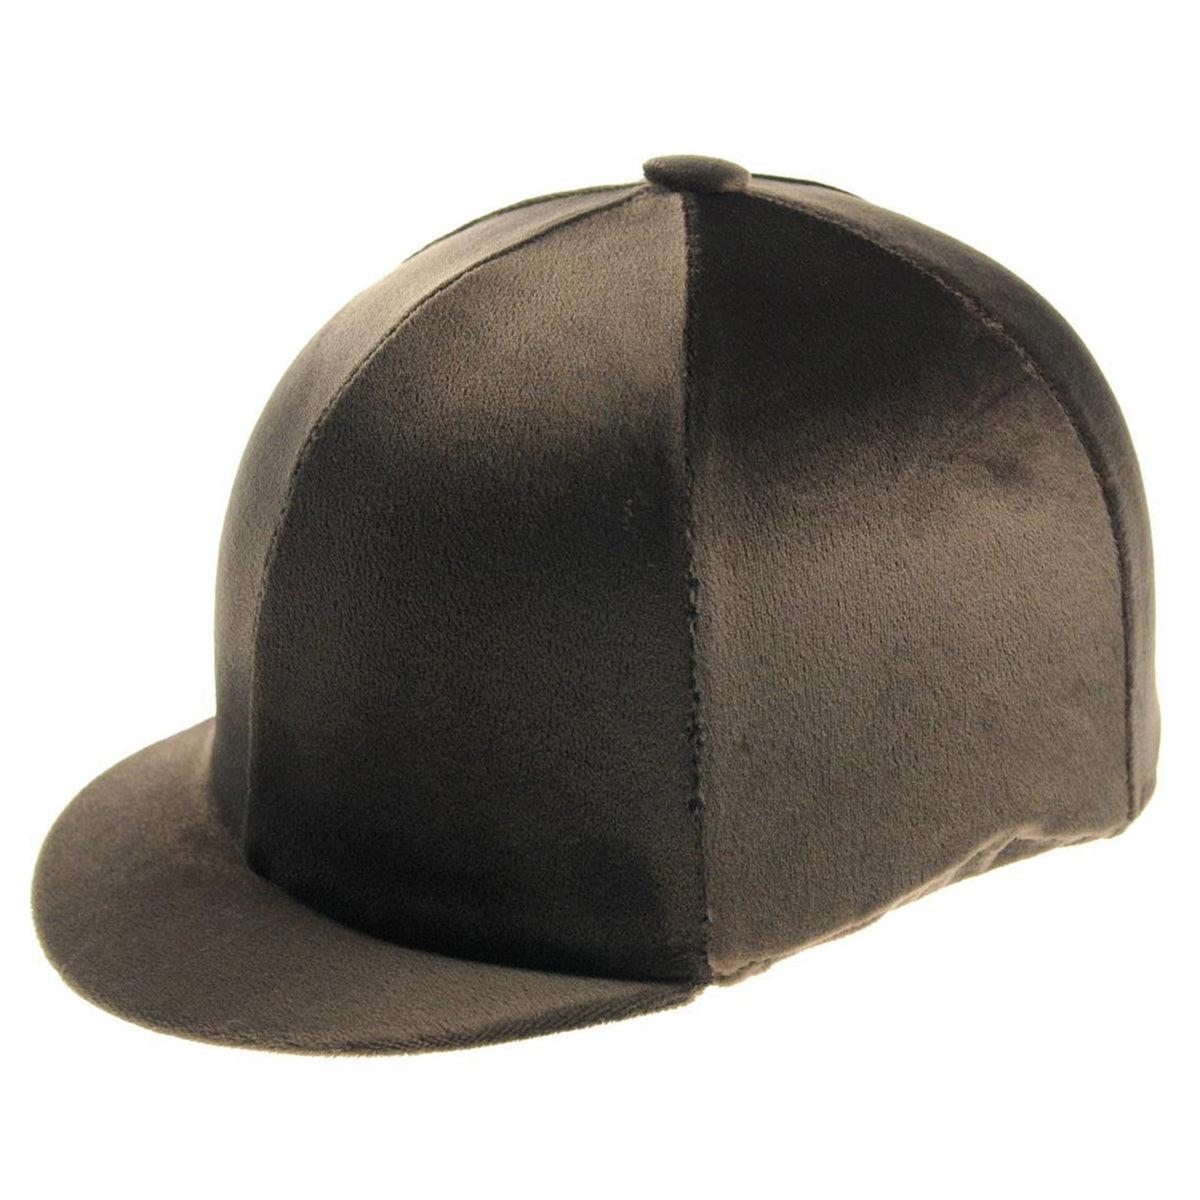 Hat cover